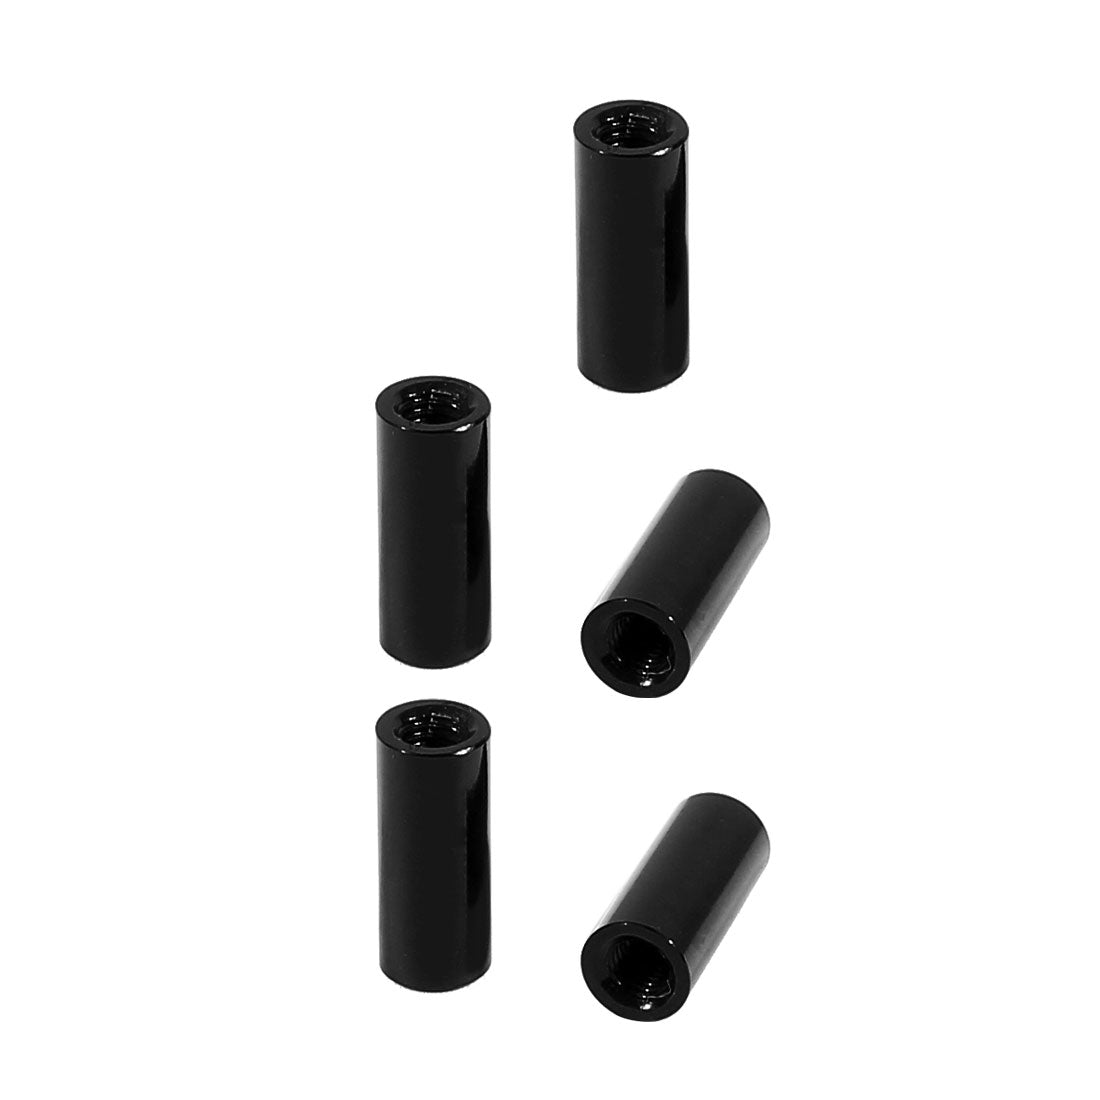 uxcell Uxcell 5Pcs M3 x 12mm Round Aluminum Column Alloy Standoff Spacer Stud Fastener for Quadcopter Black